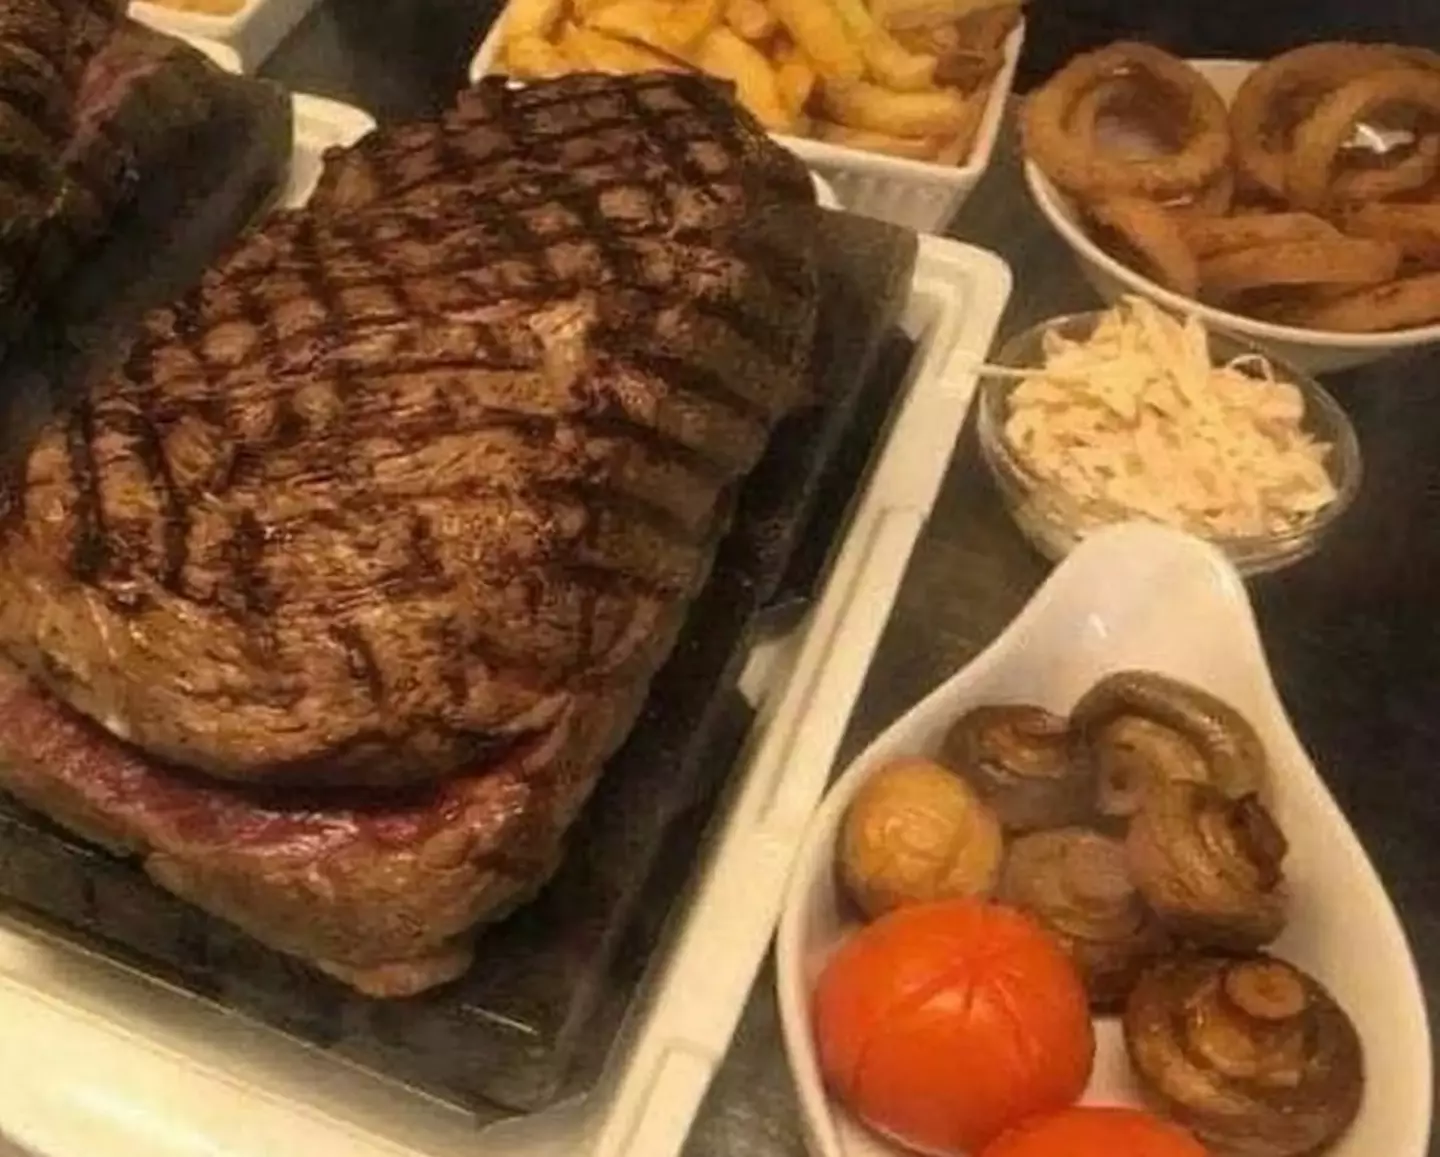 The steakhouse owner actually made this challenge easier, dropping the lump of meat from 72oz to 62oz.